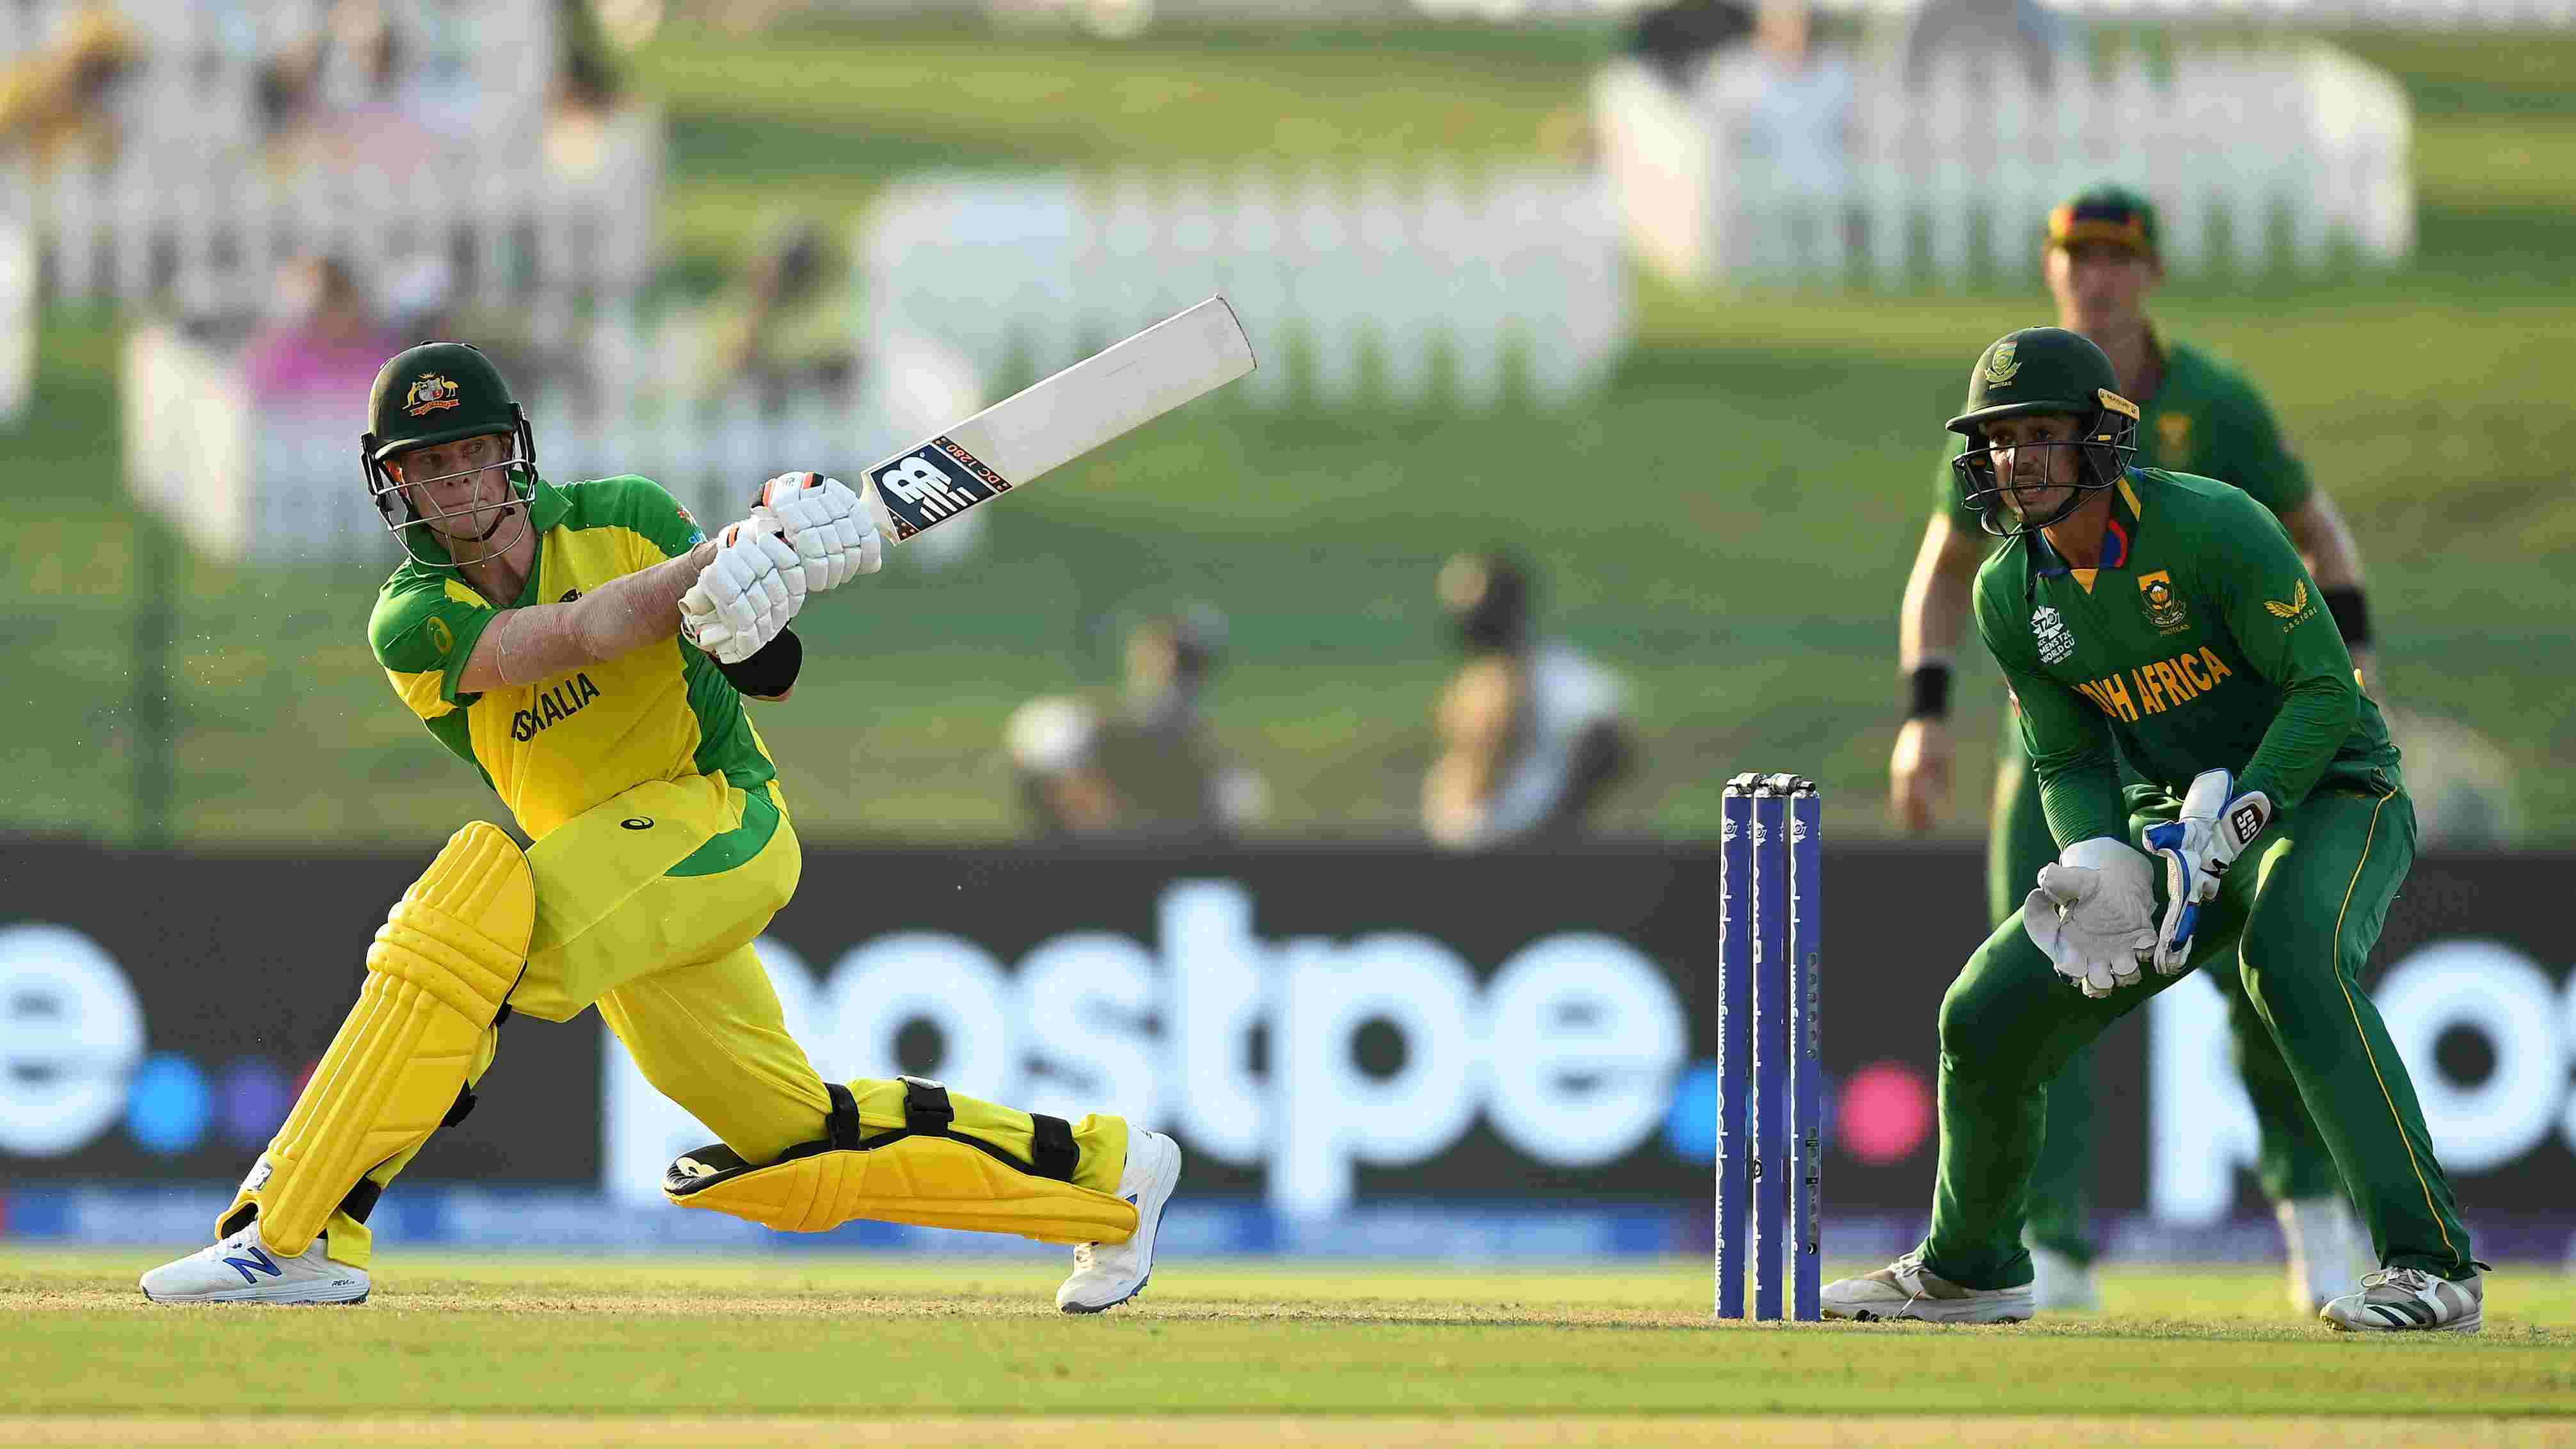 T20 World Cup | AUS vs SA: Proteas bowlers make Aussies work hard for first win despite small target 